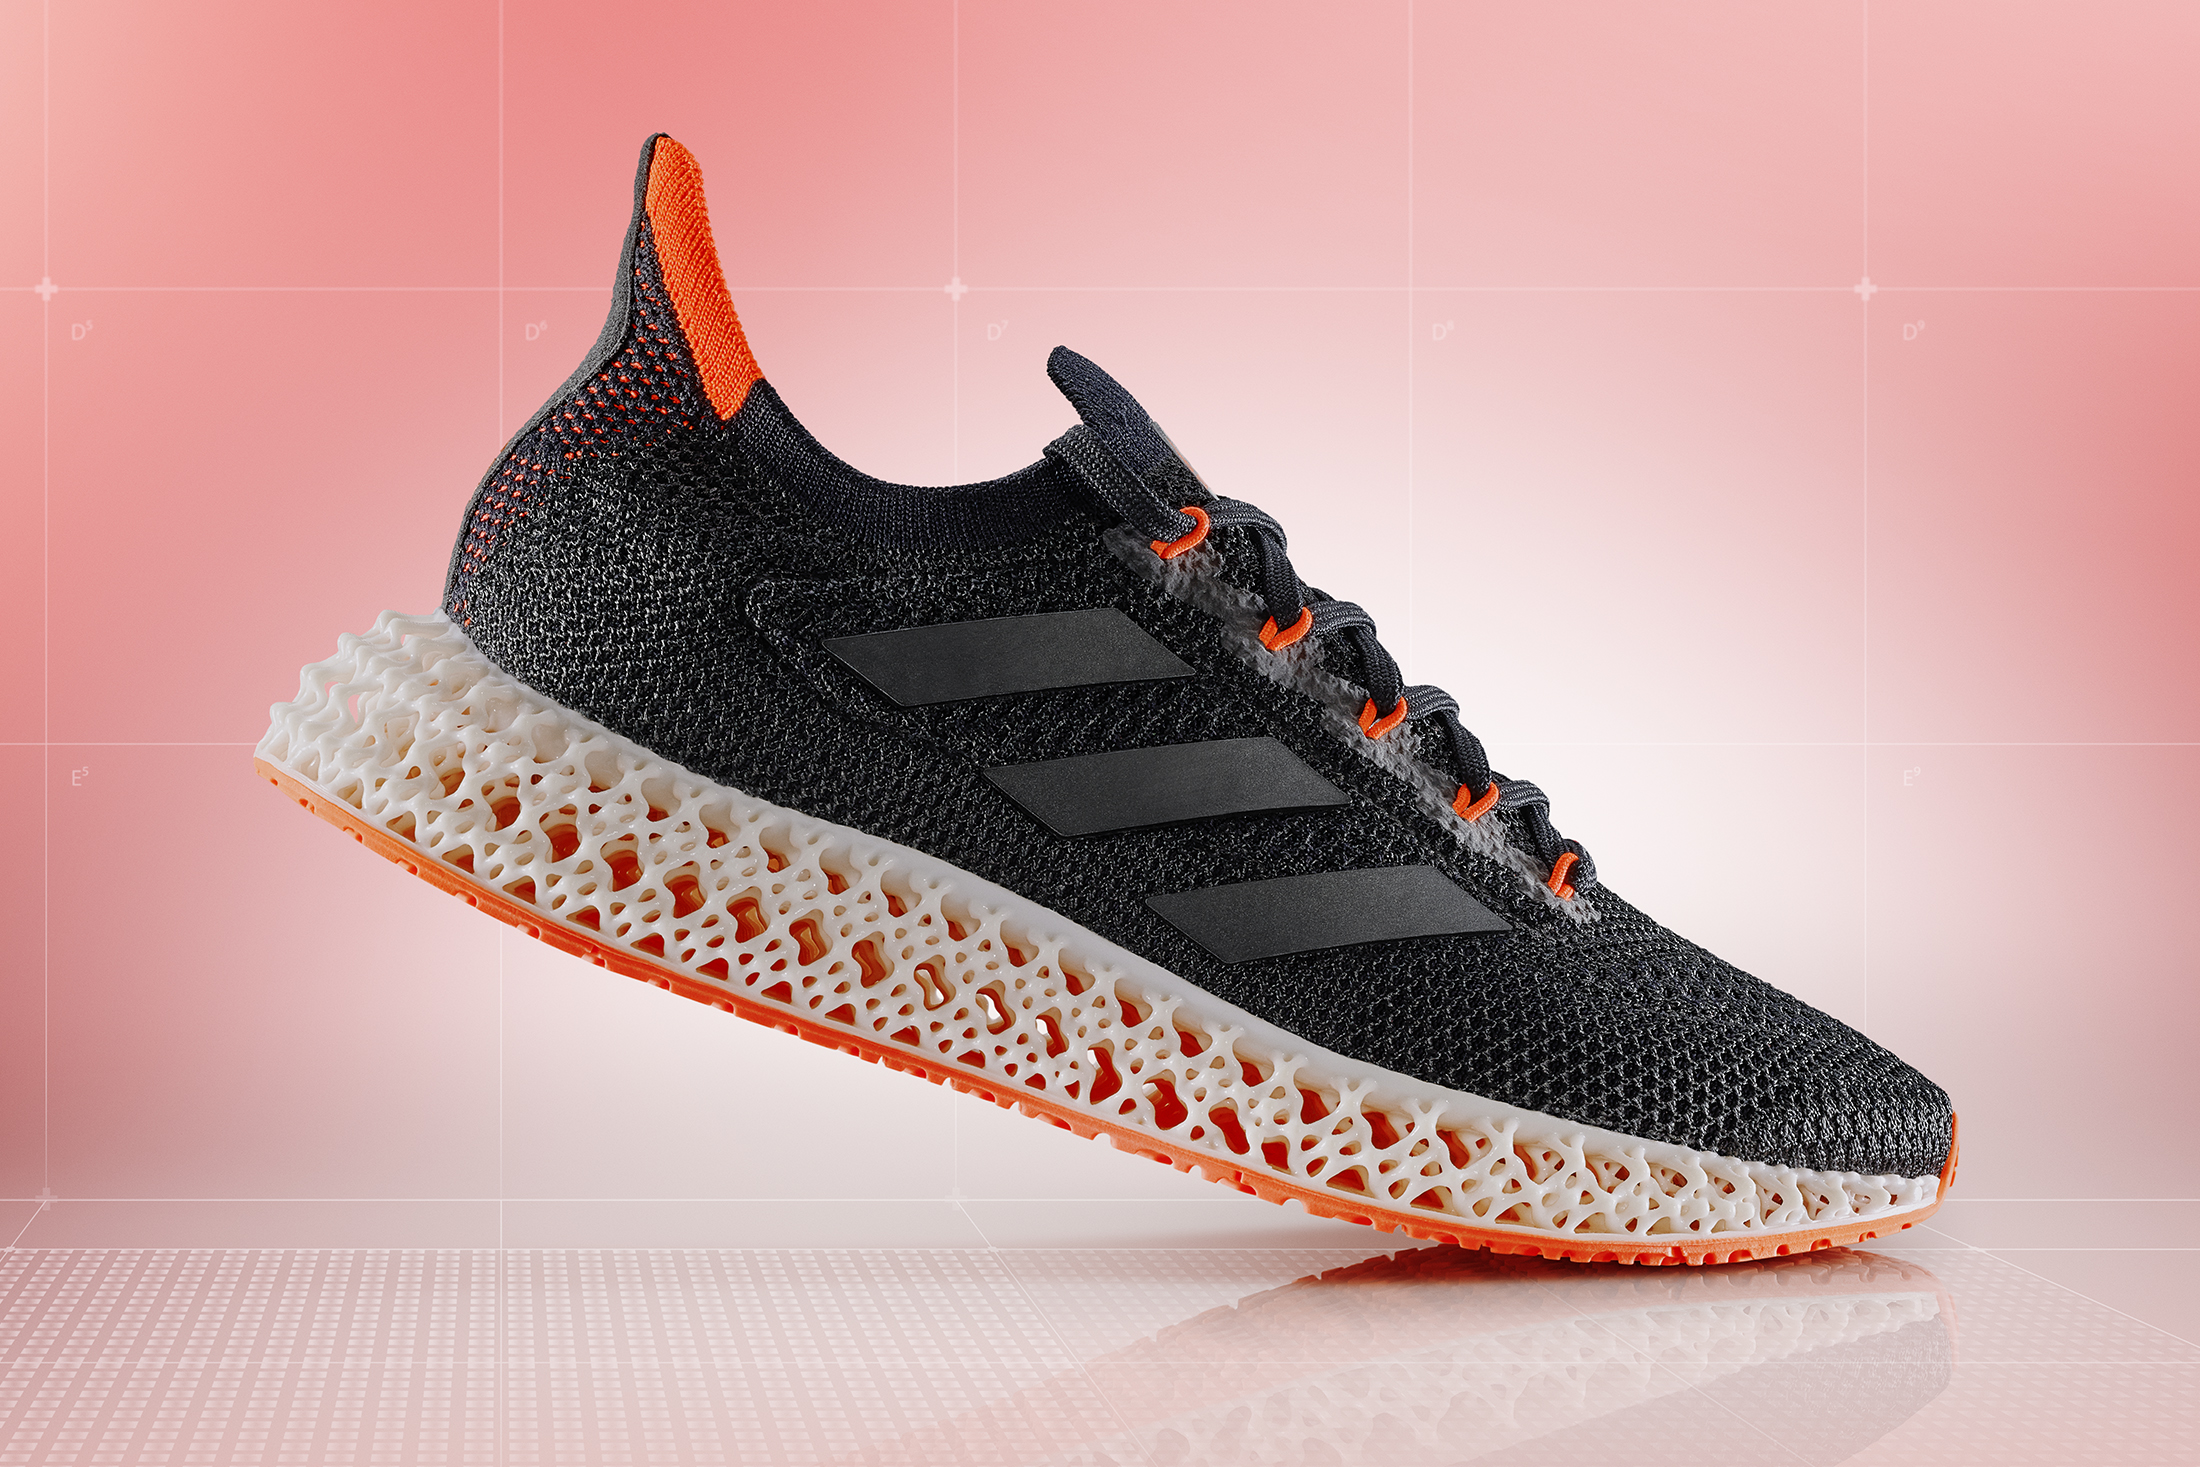 New adidas 4DFWD Shoes with 3D Printed Midsoles Available for ...